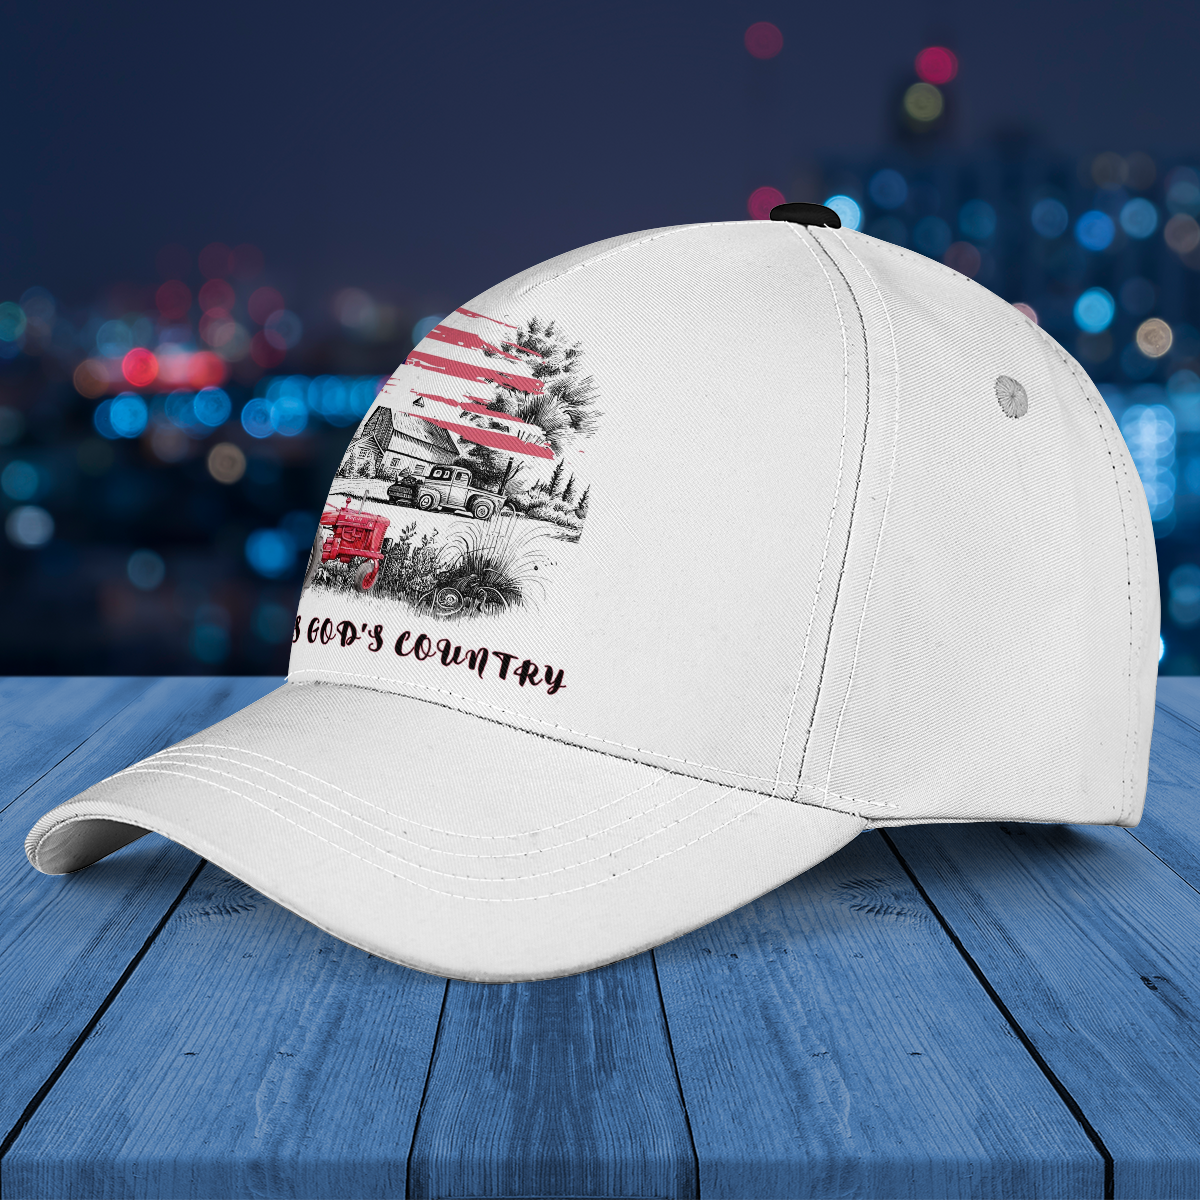 This is God's Country US Flag Baseball Cap